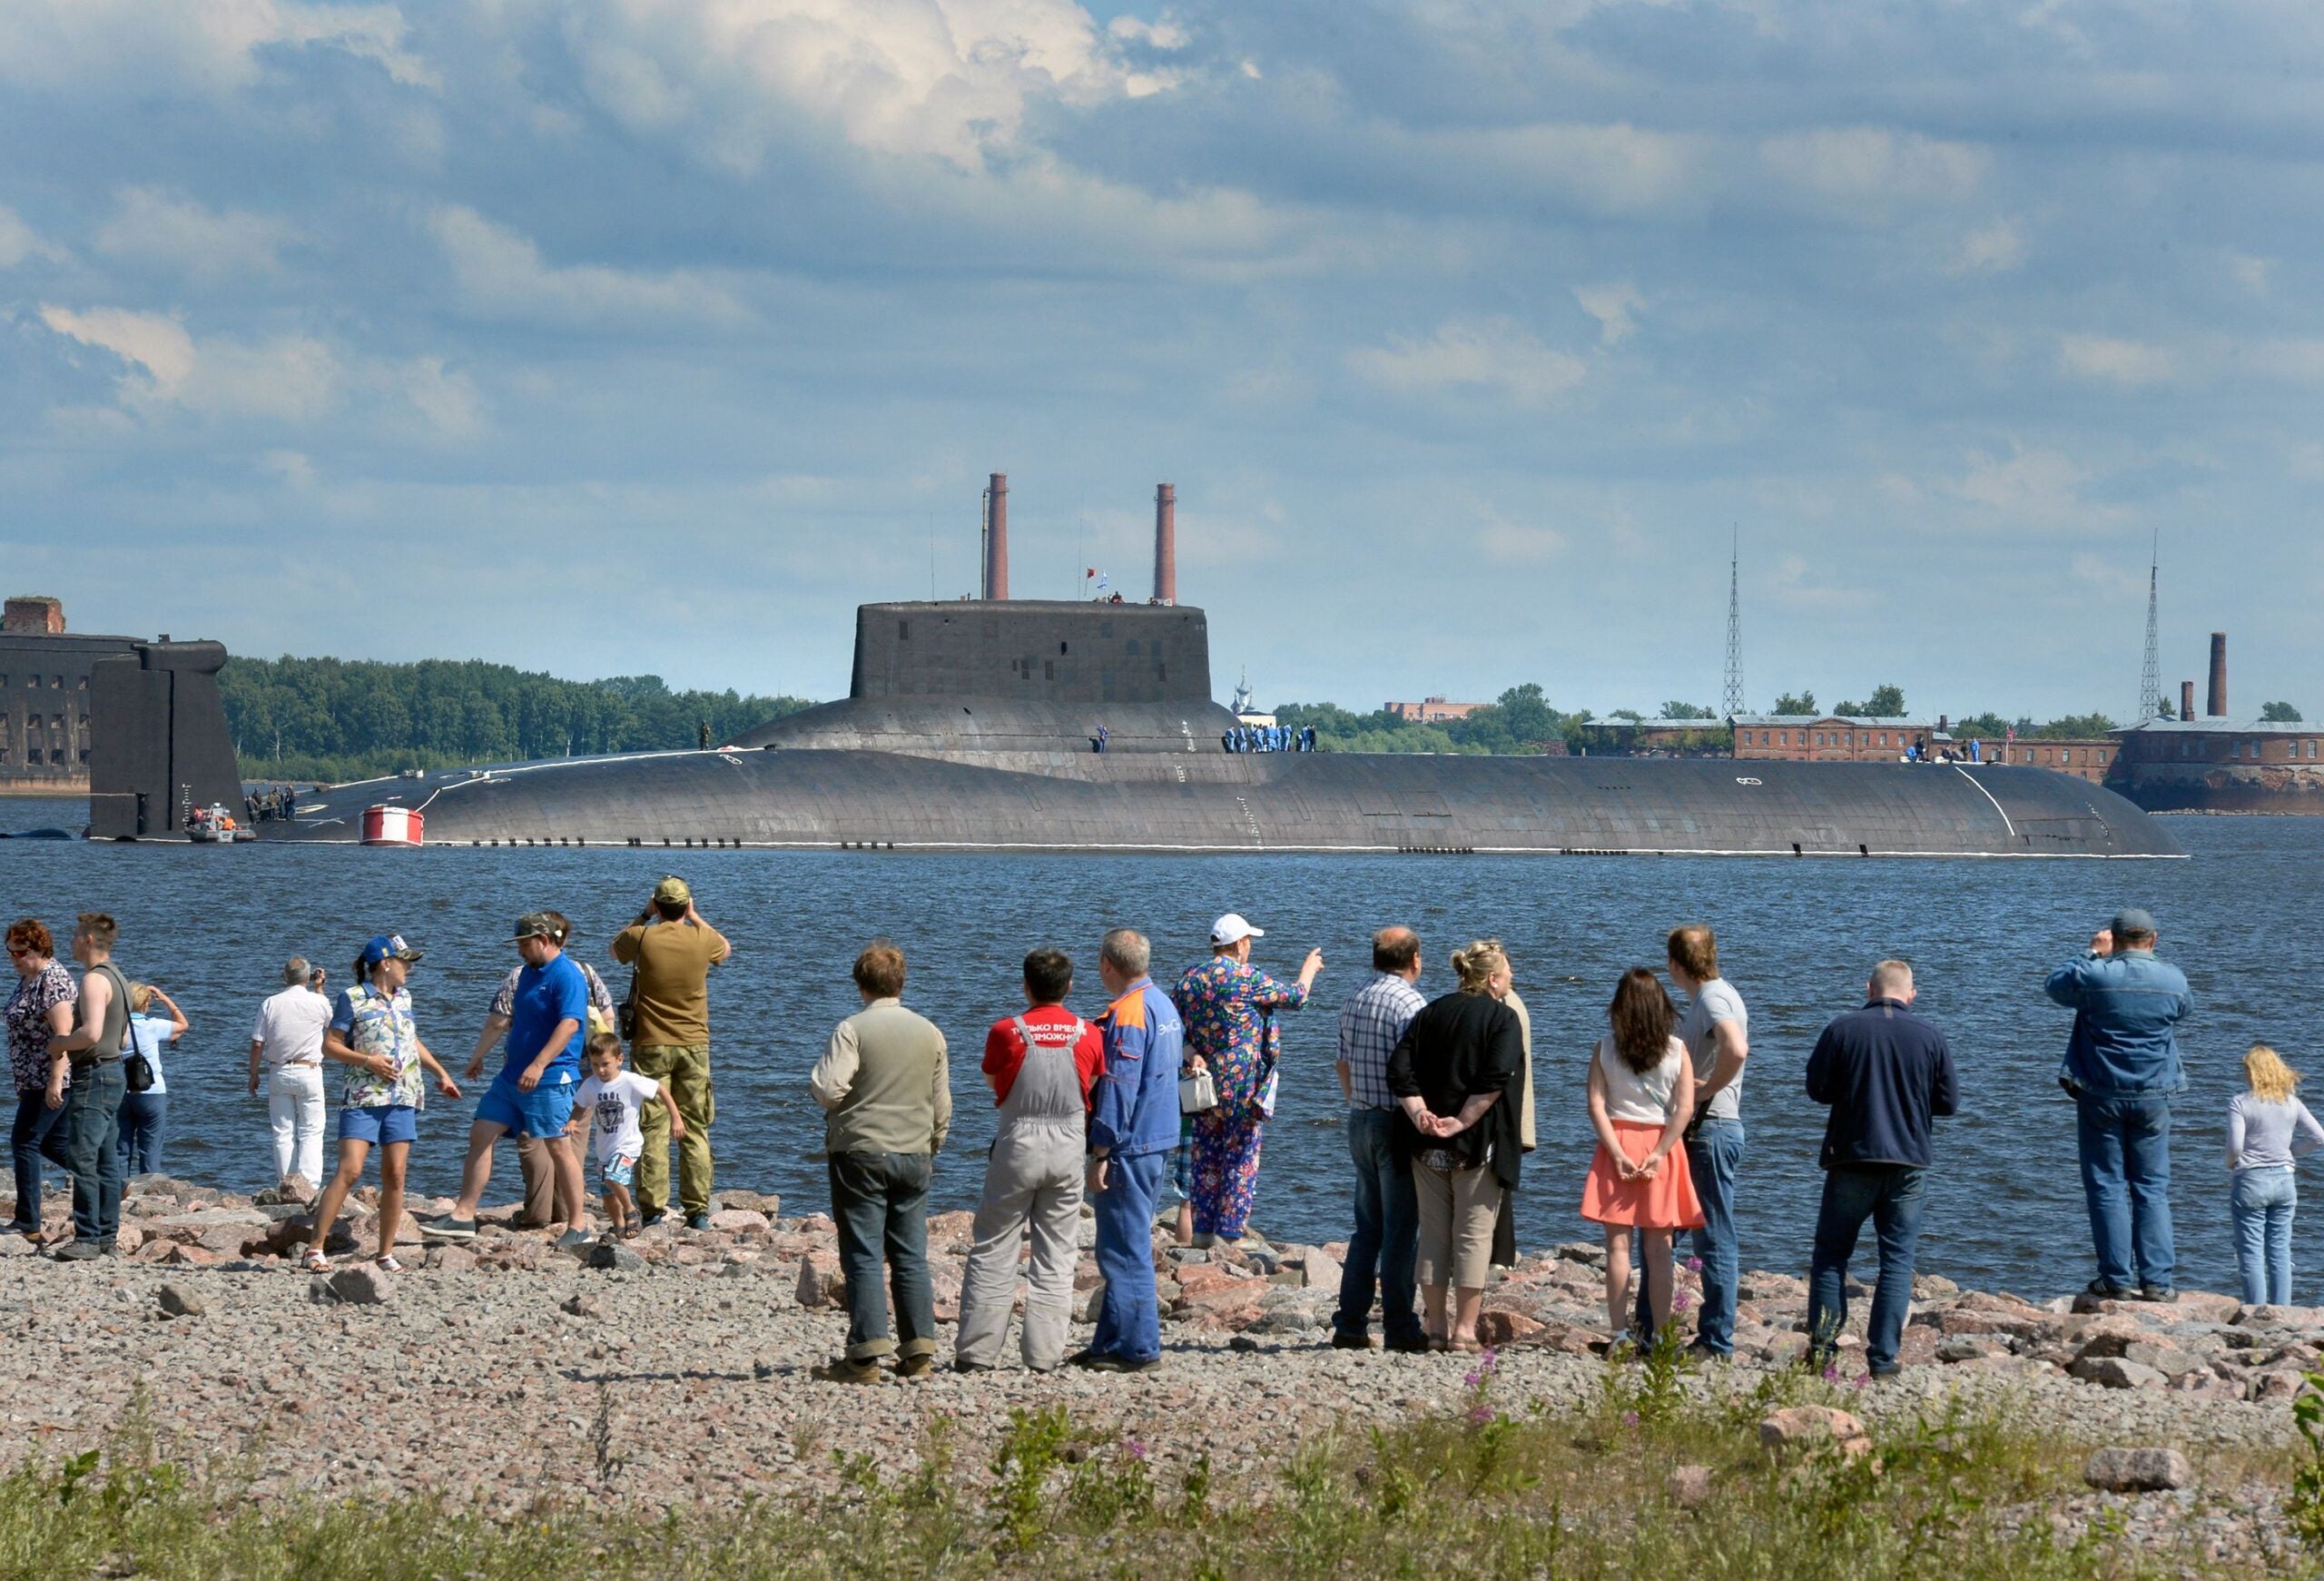 People watch as the Russian submarine Dmitry Donskoy (NATO - Typhoon class), the world's largest in active service, arrives at Kronstadt Navy base, outside Saint Petersburg, on July 26, 2017 to take part in the Naval Military Parade. 
The Naval Military Parade will be held in Saint Petersburg on Navy Day, July 30. / AFP PHOTO / OLGA MALTSEVA        (Photo credit should read OLGA MALTSEVA/AFP via Getty Images)